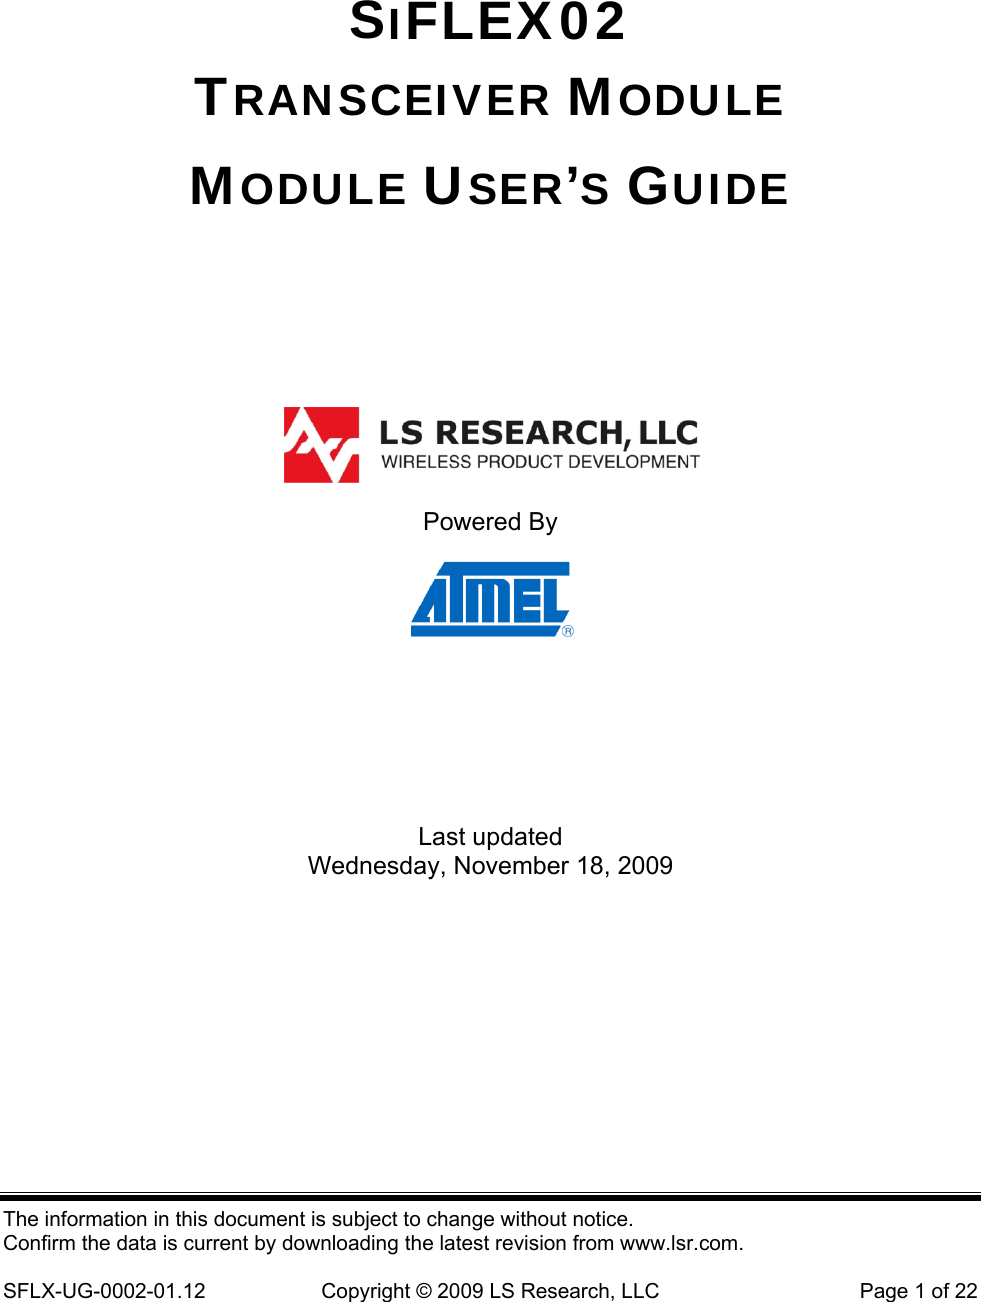  SIFLEX02 TRANSCEIVER MODULE MODULE USER’S GUIDE     Powered By     Last updated Wednesday, November 18, 2009 The information in this document is subject to change without notice. Confirm the data is current by downloading the latest revision from www.lsr.com.  SFLX-UG-0002-01.12  Copyright © 2009 LS Research, LLC  Page 1 of 22 